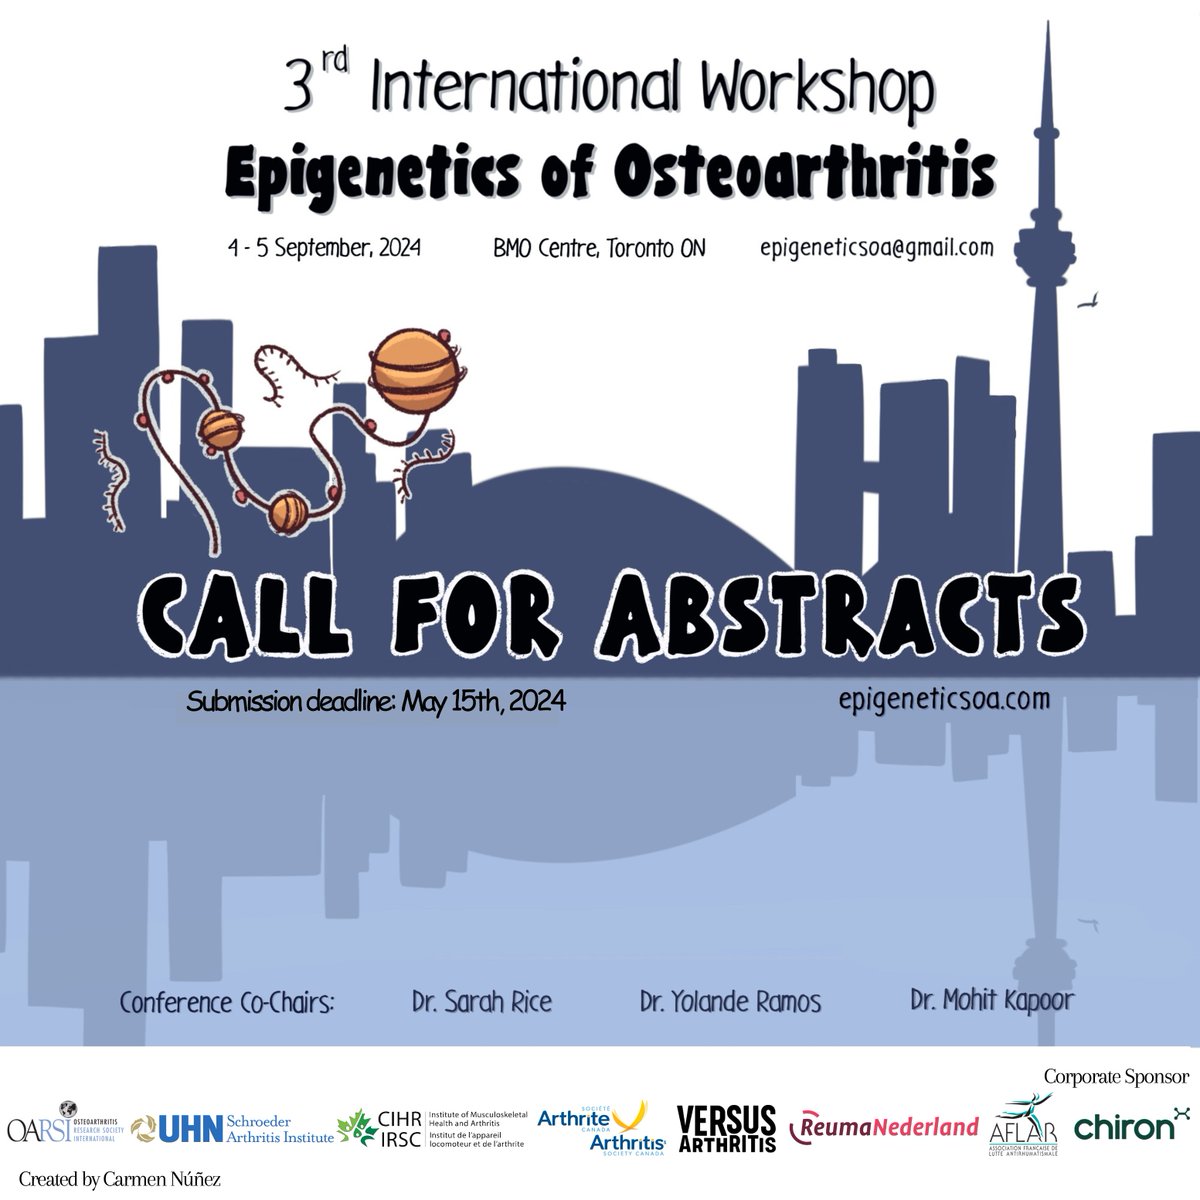 EXTENDED ABSTRACT SUBMISSION: We are extending Abstract Submission by 2 weeks, till MAY 15, 2024, for the 3rd International Workshop on the Epigenetics of #OA, taking place on Sep 4-5, 2024, in Toronto. To register & submit your abstract -> epigeneticsoa.com…